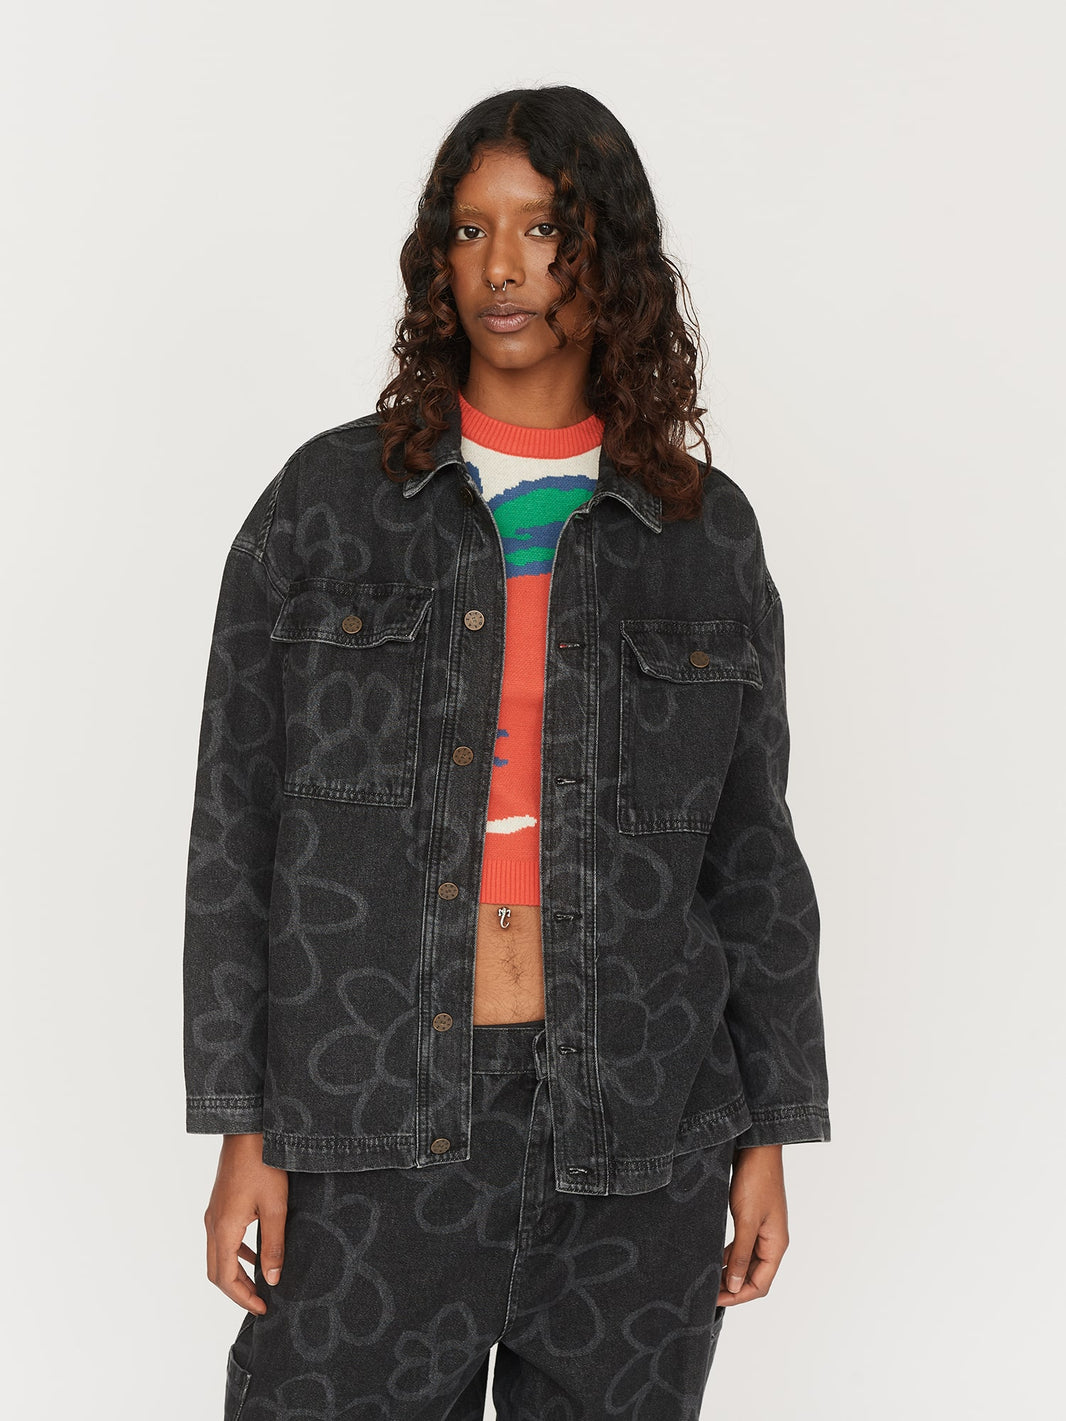 All Sale Clothing, Shoes & Accessories | Women's & Mens Sale | Lazy Oaf